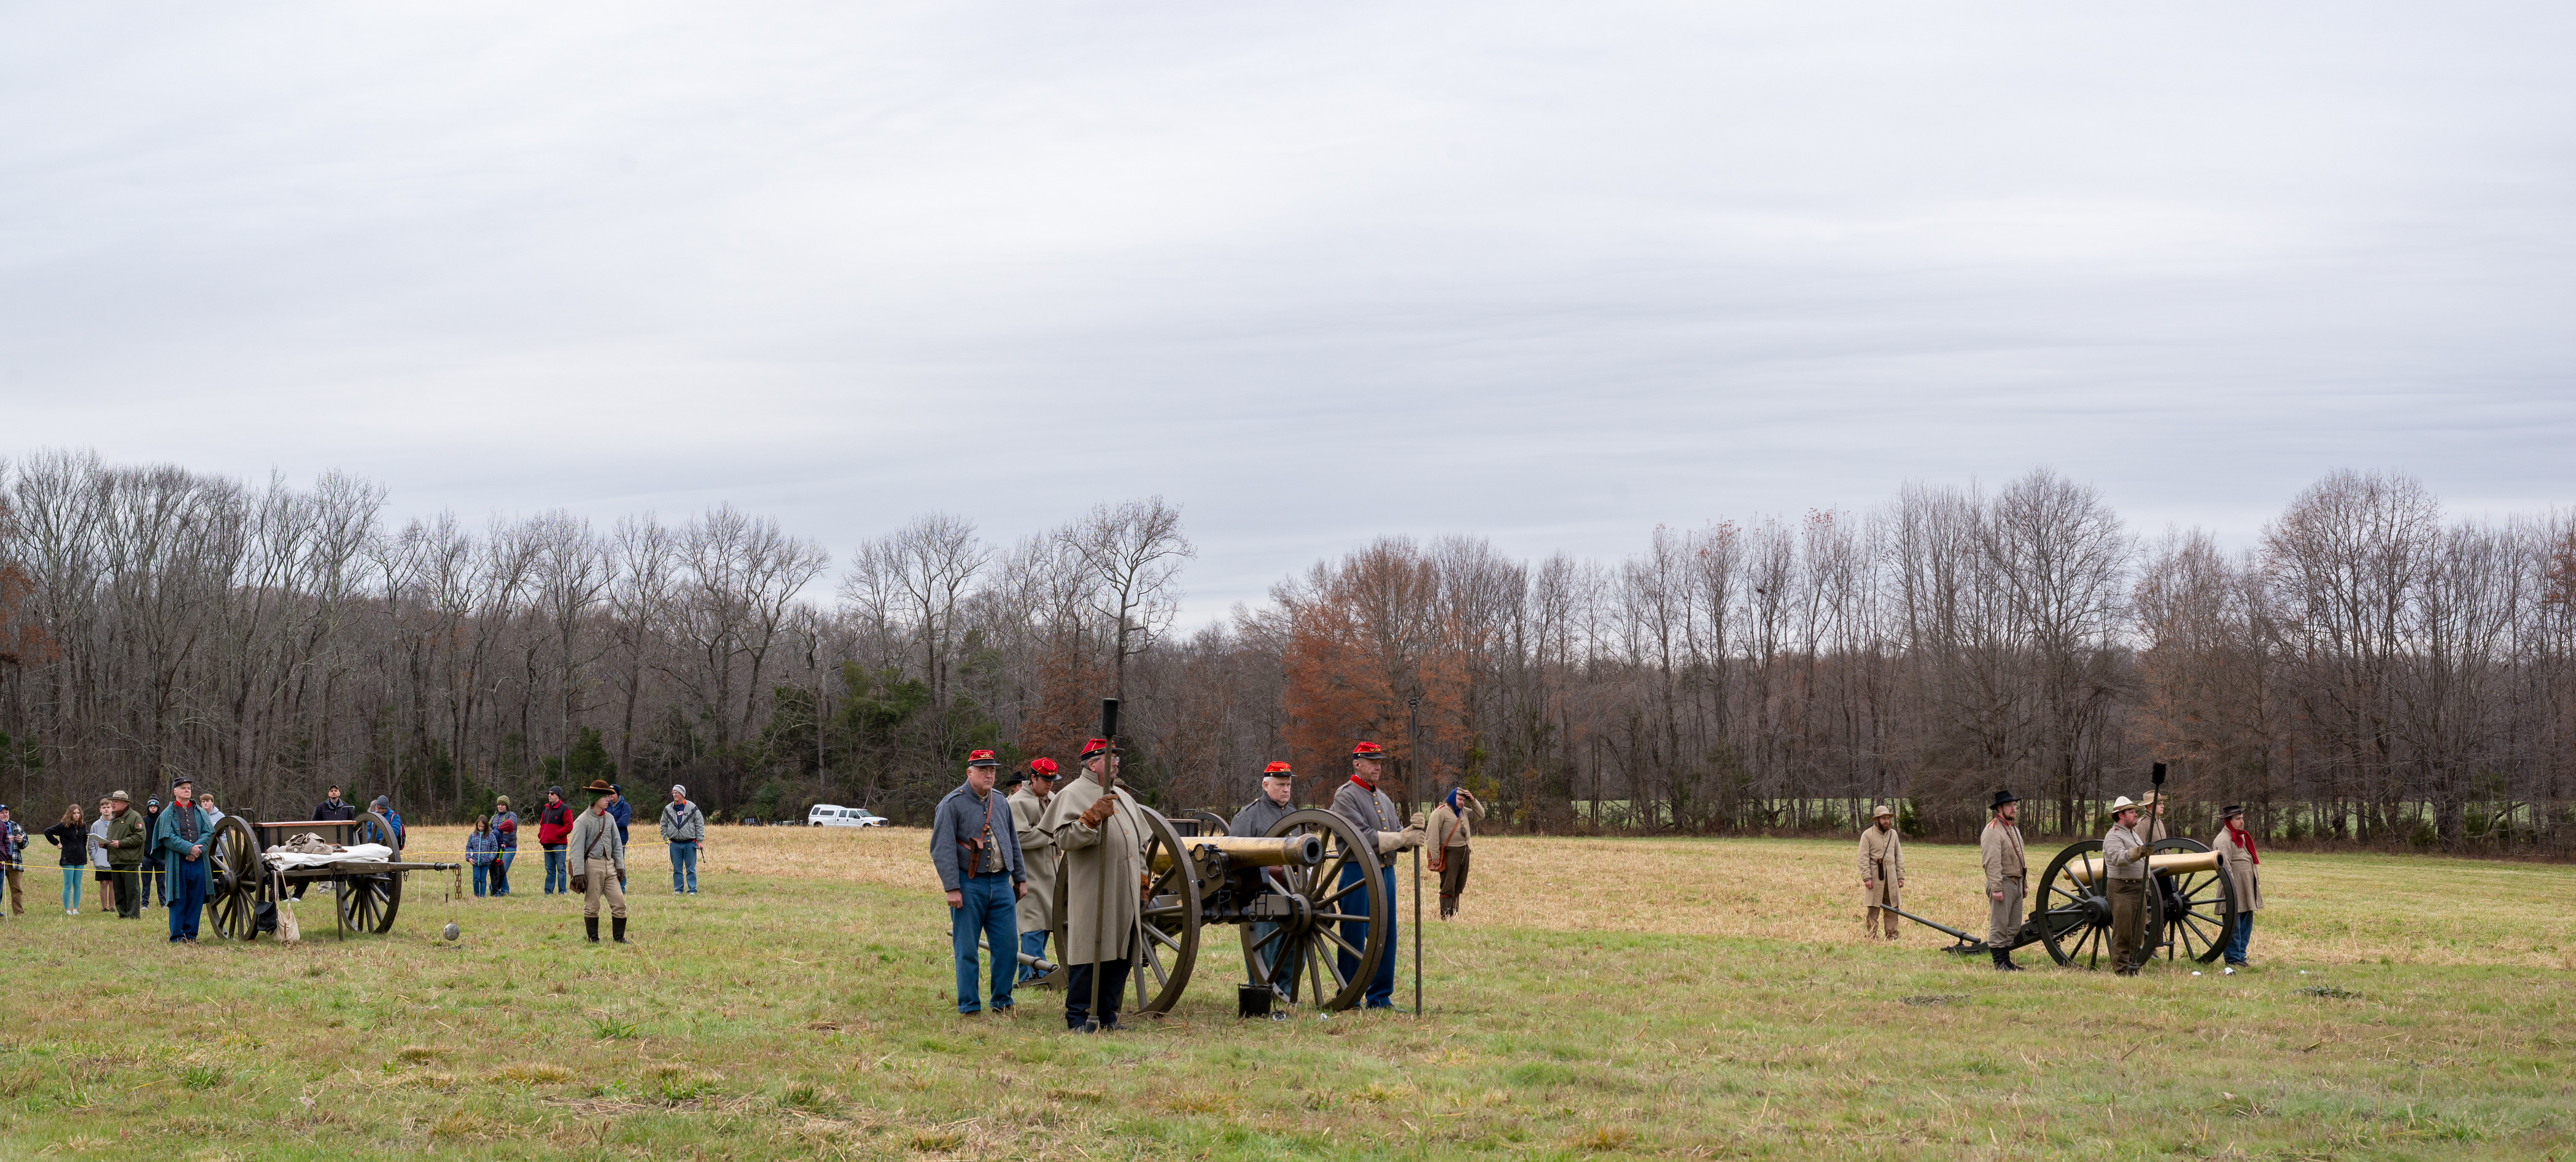 Panoramic image of living historians dressed as Confederate artillerymen near two cannons pointed at a wide open field.